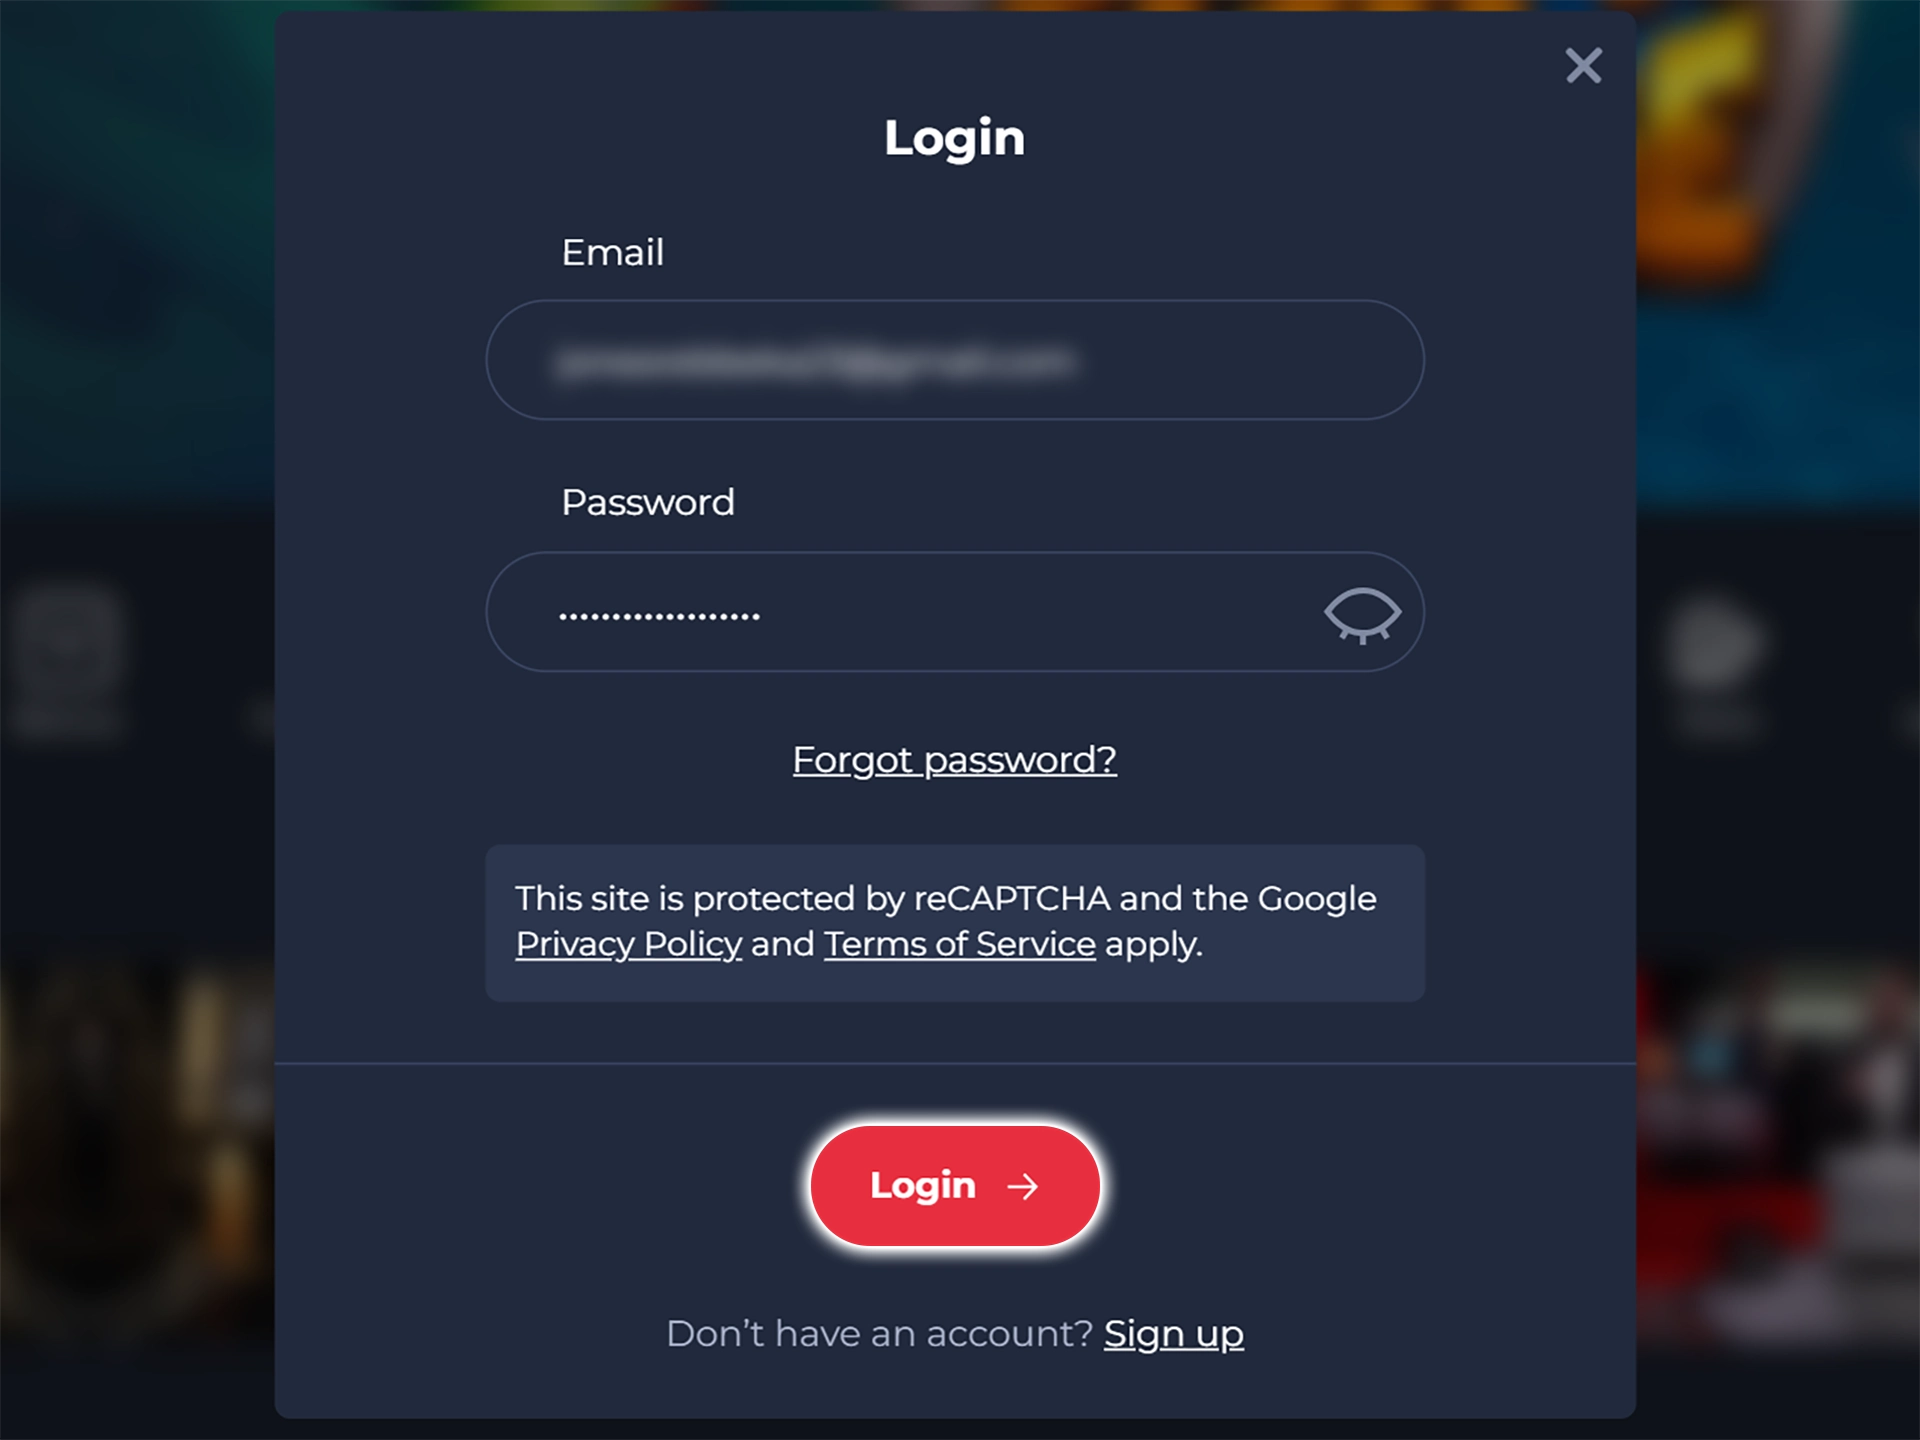 Enter your login details to access your CricV account.